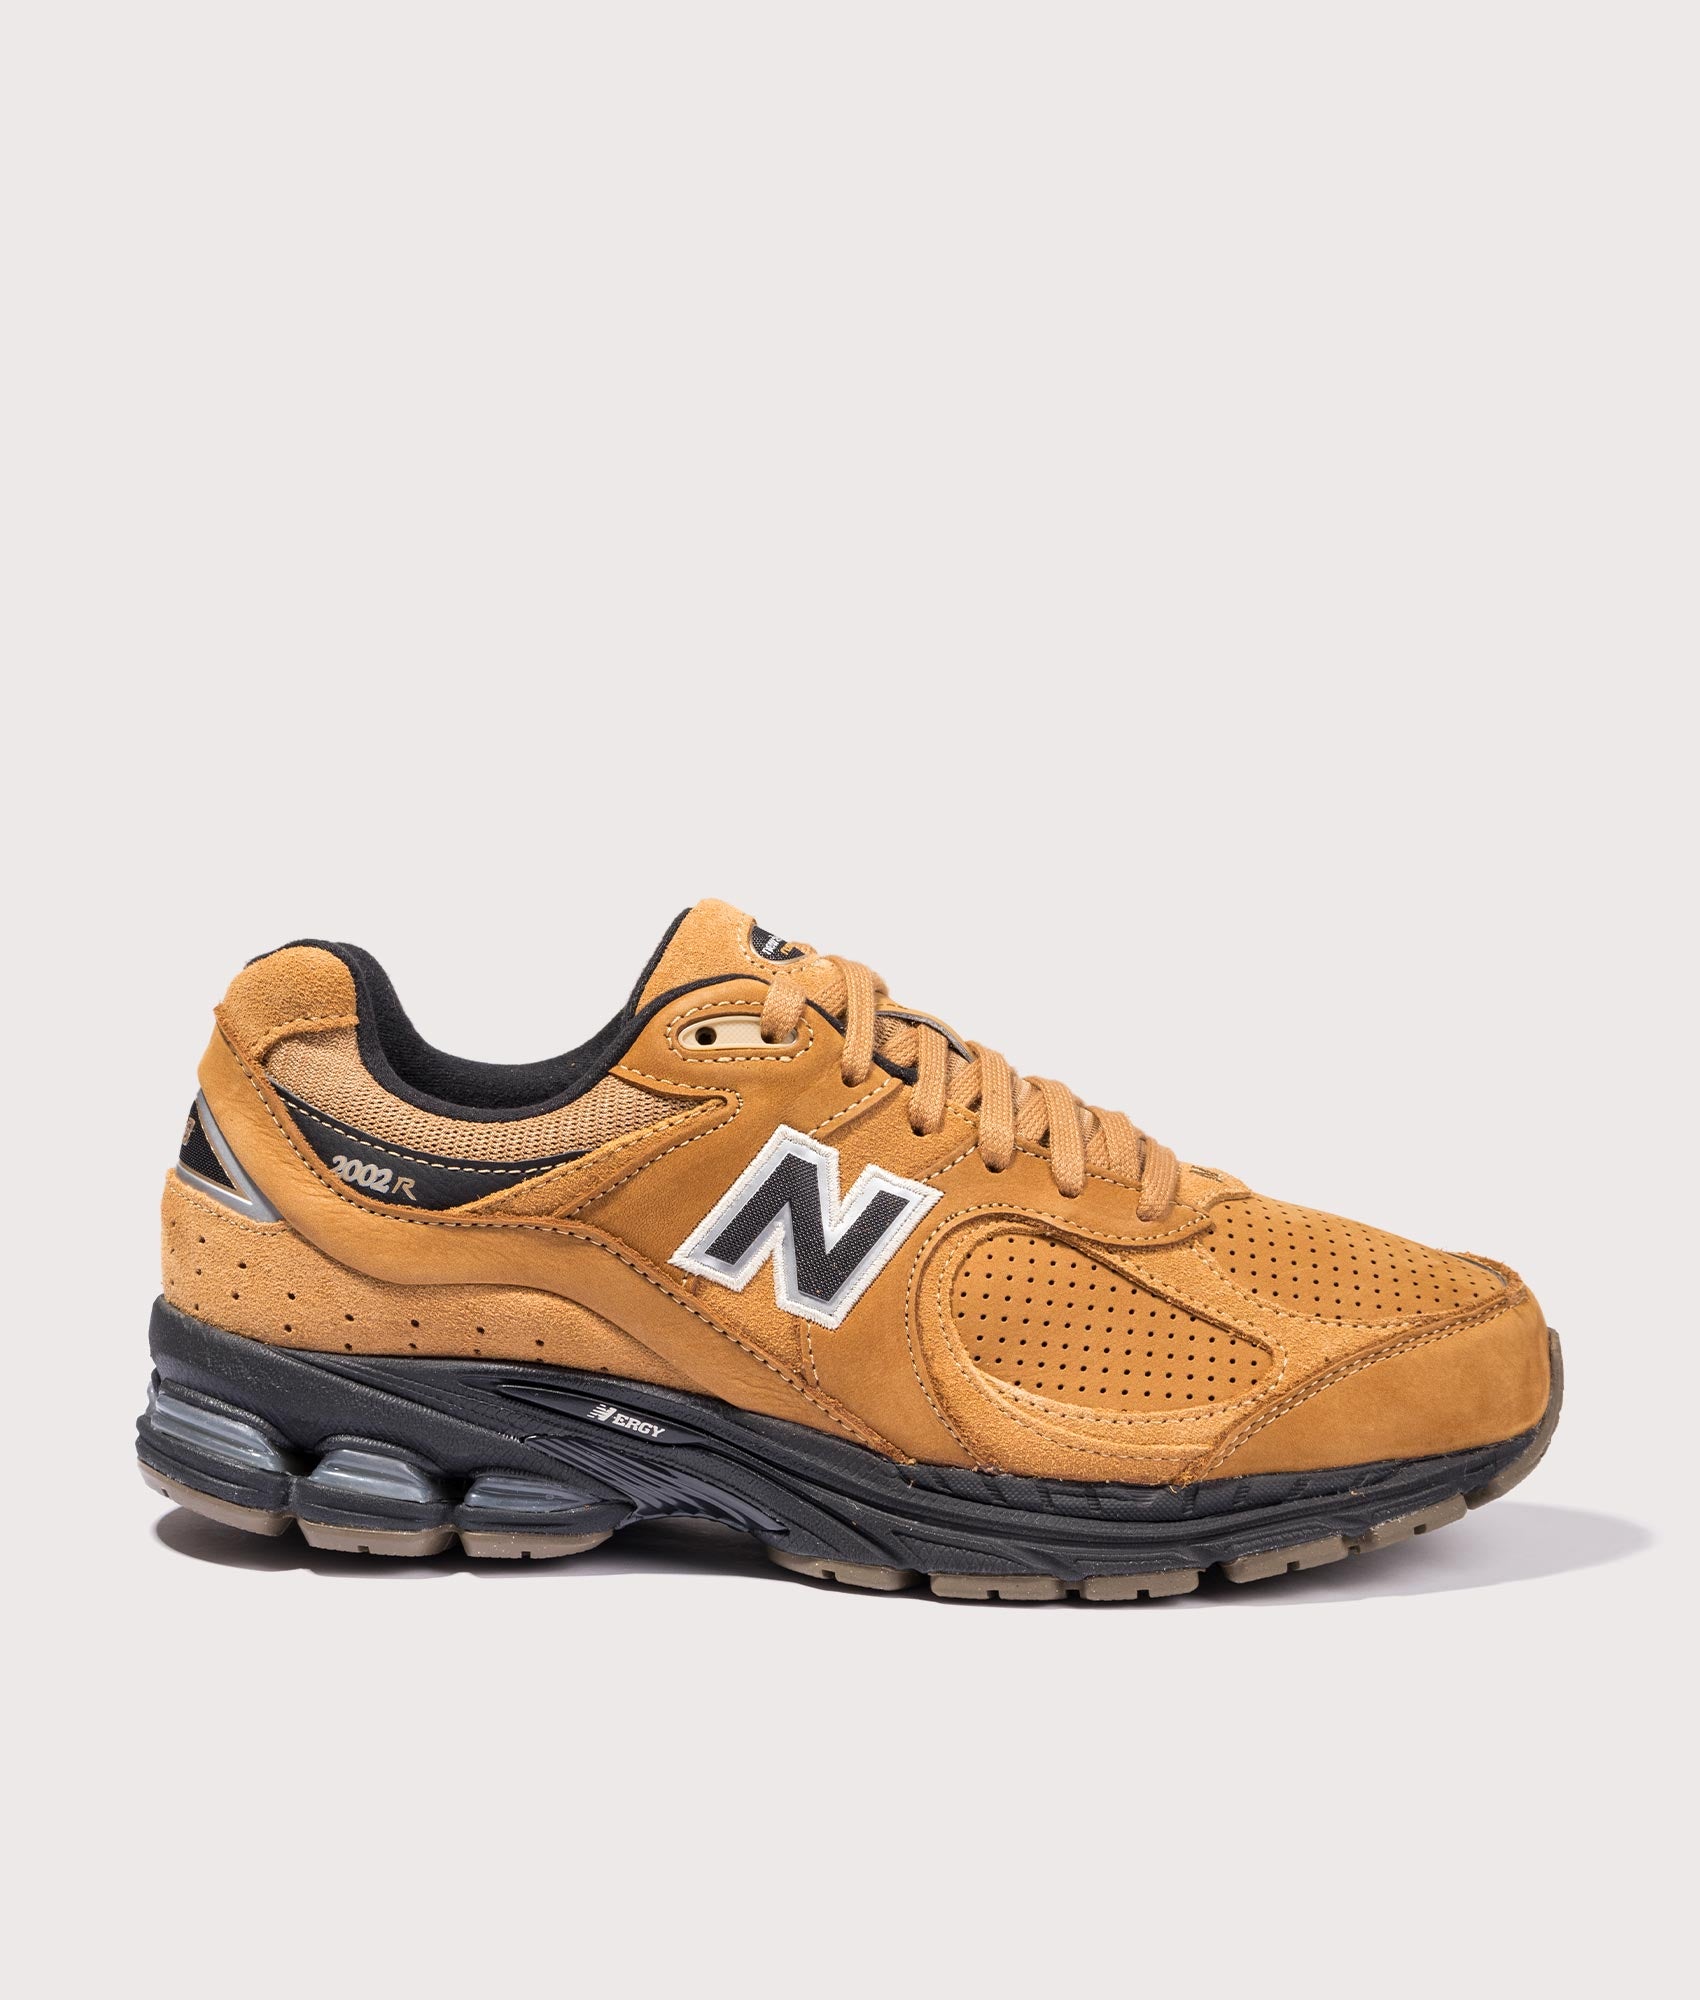 New Balance Mens 2002R Sneakers - Colour: M2002REI Tobacco - Size: 8